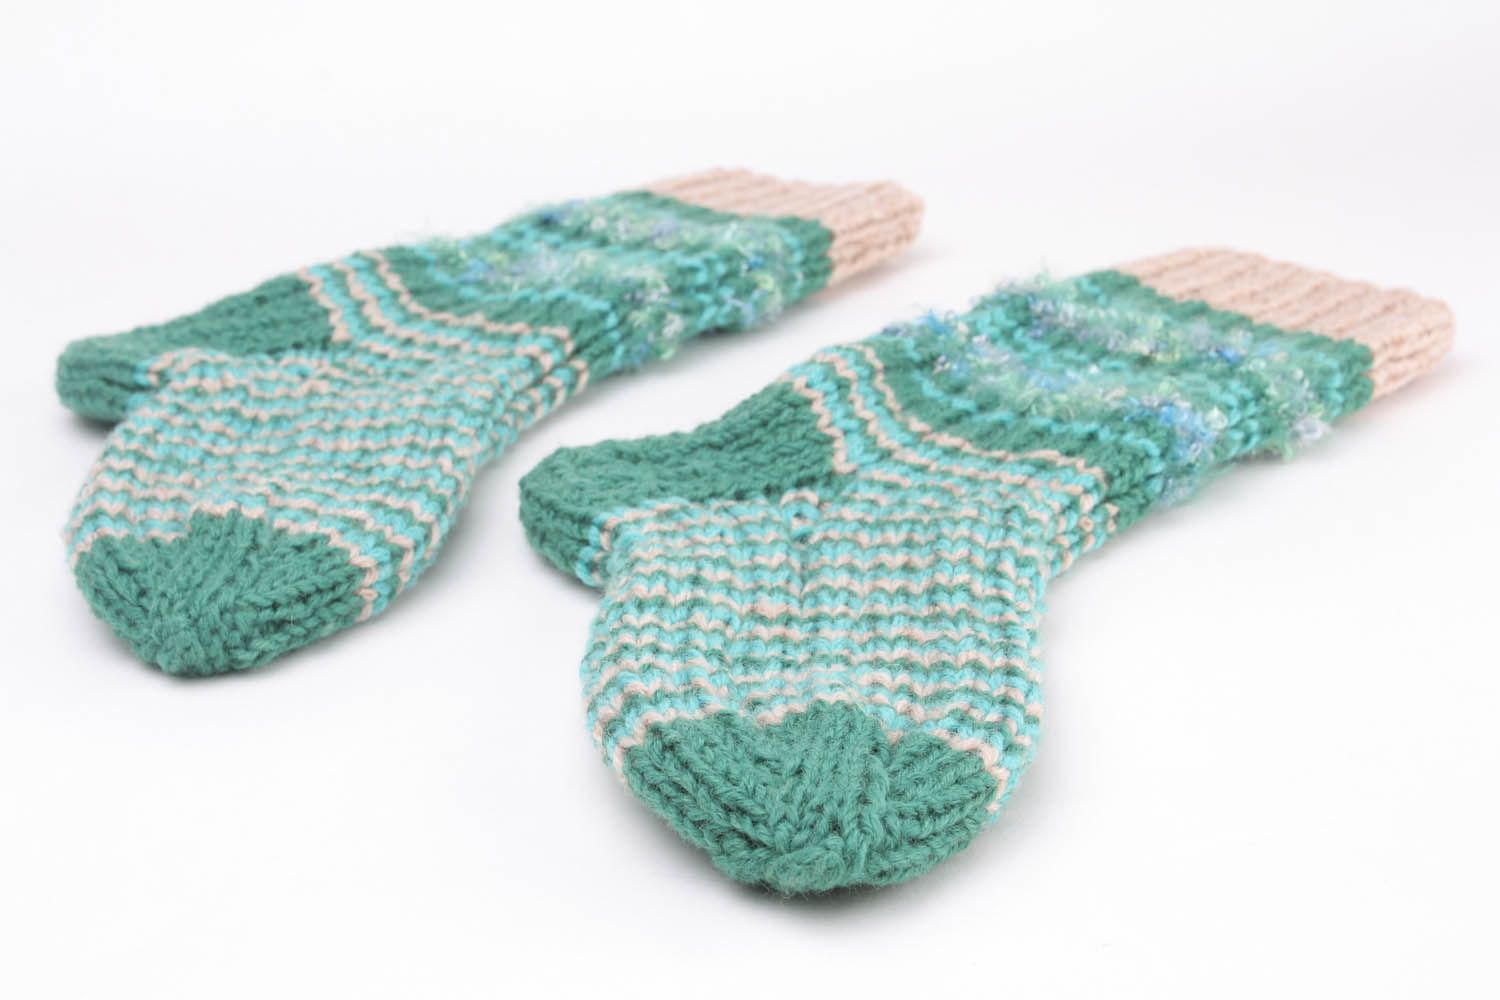 Socks knitted of woolen and semi-woolen threads photo 3